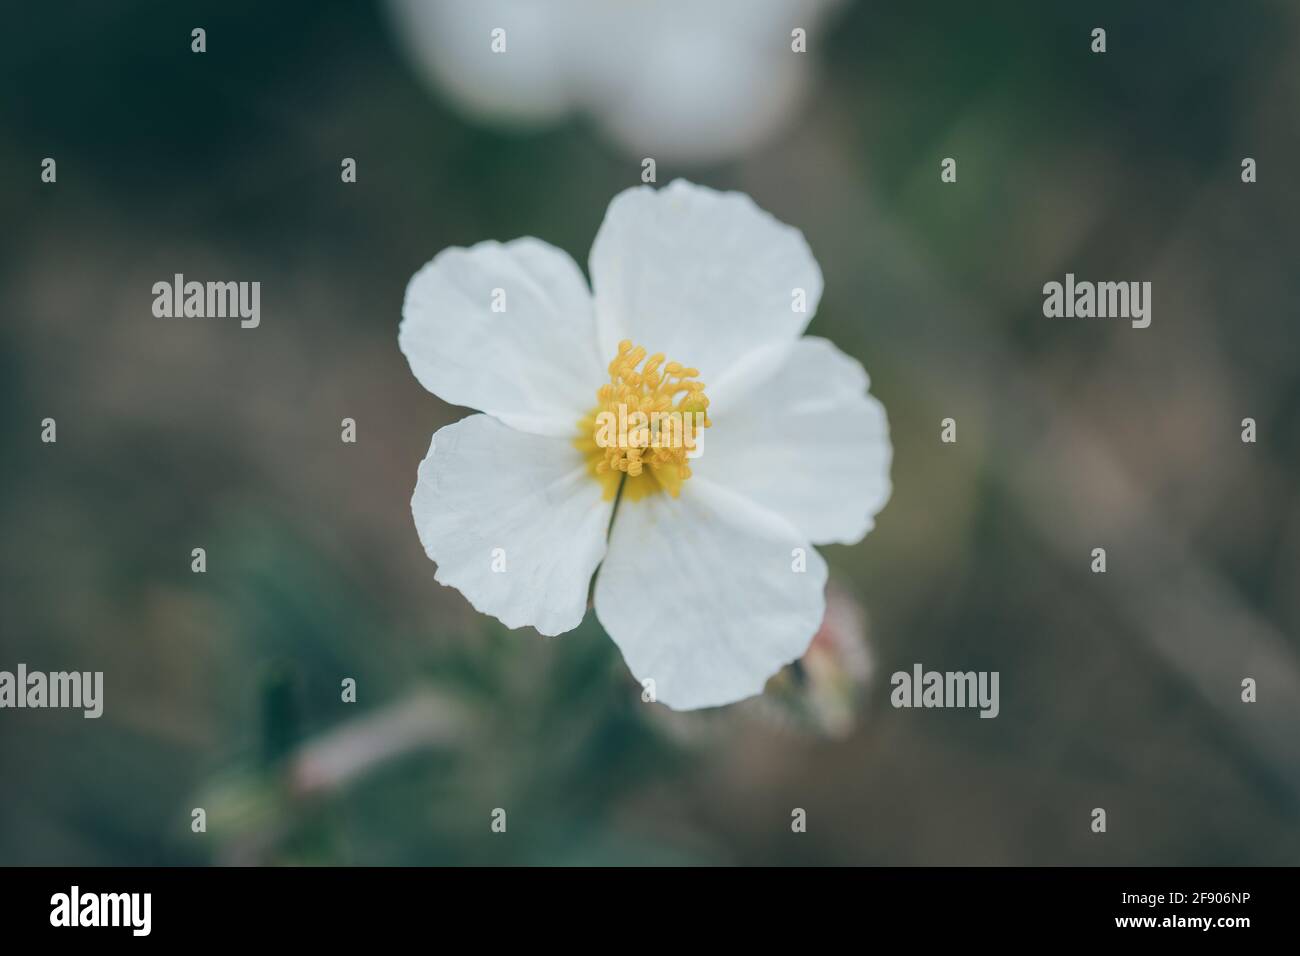 Yellow detail of anthers, stigma, pistil and filaments of a flower with white petals. Horizontal Stock Photo